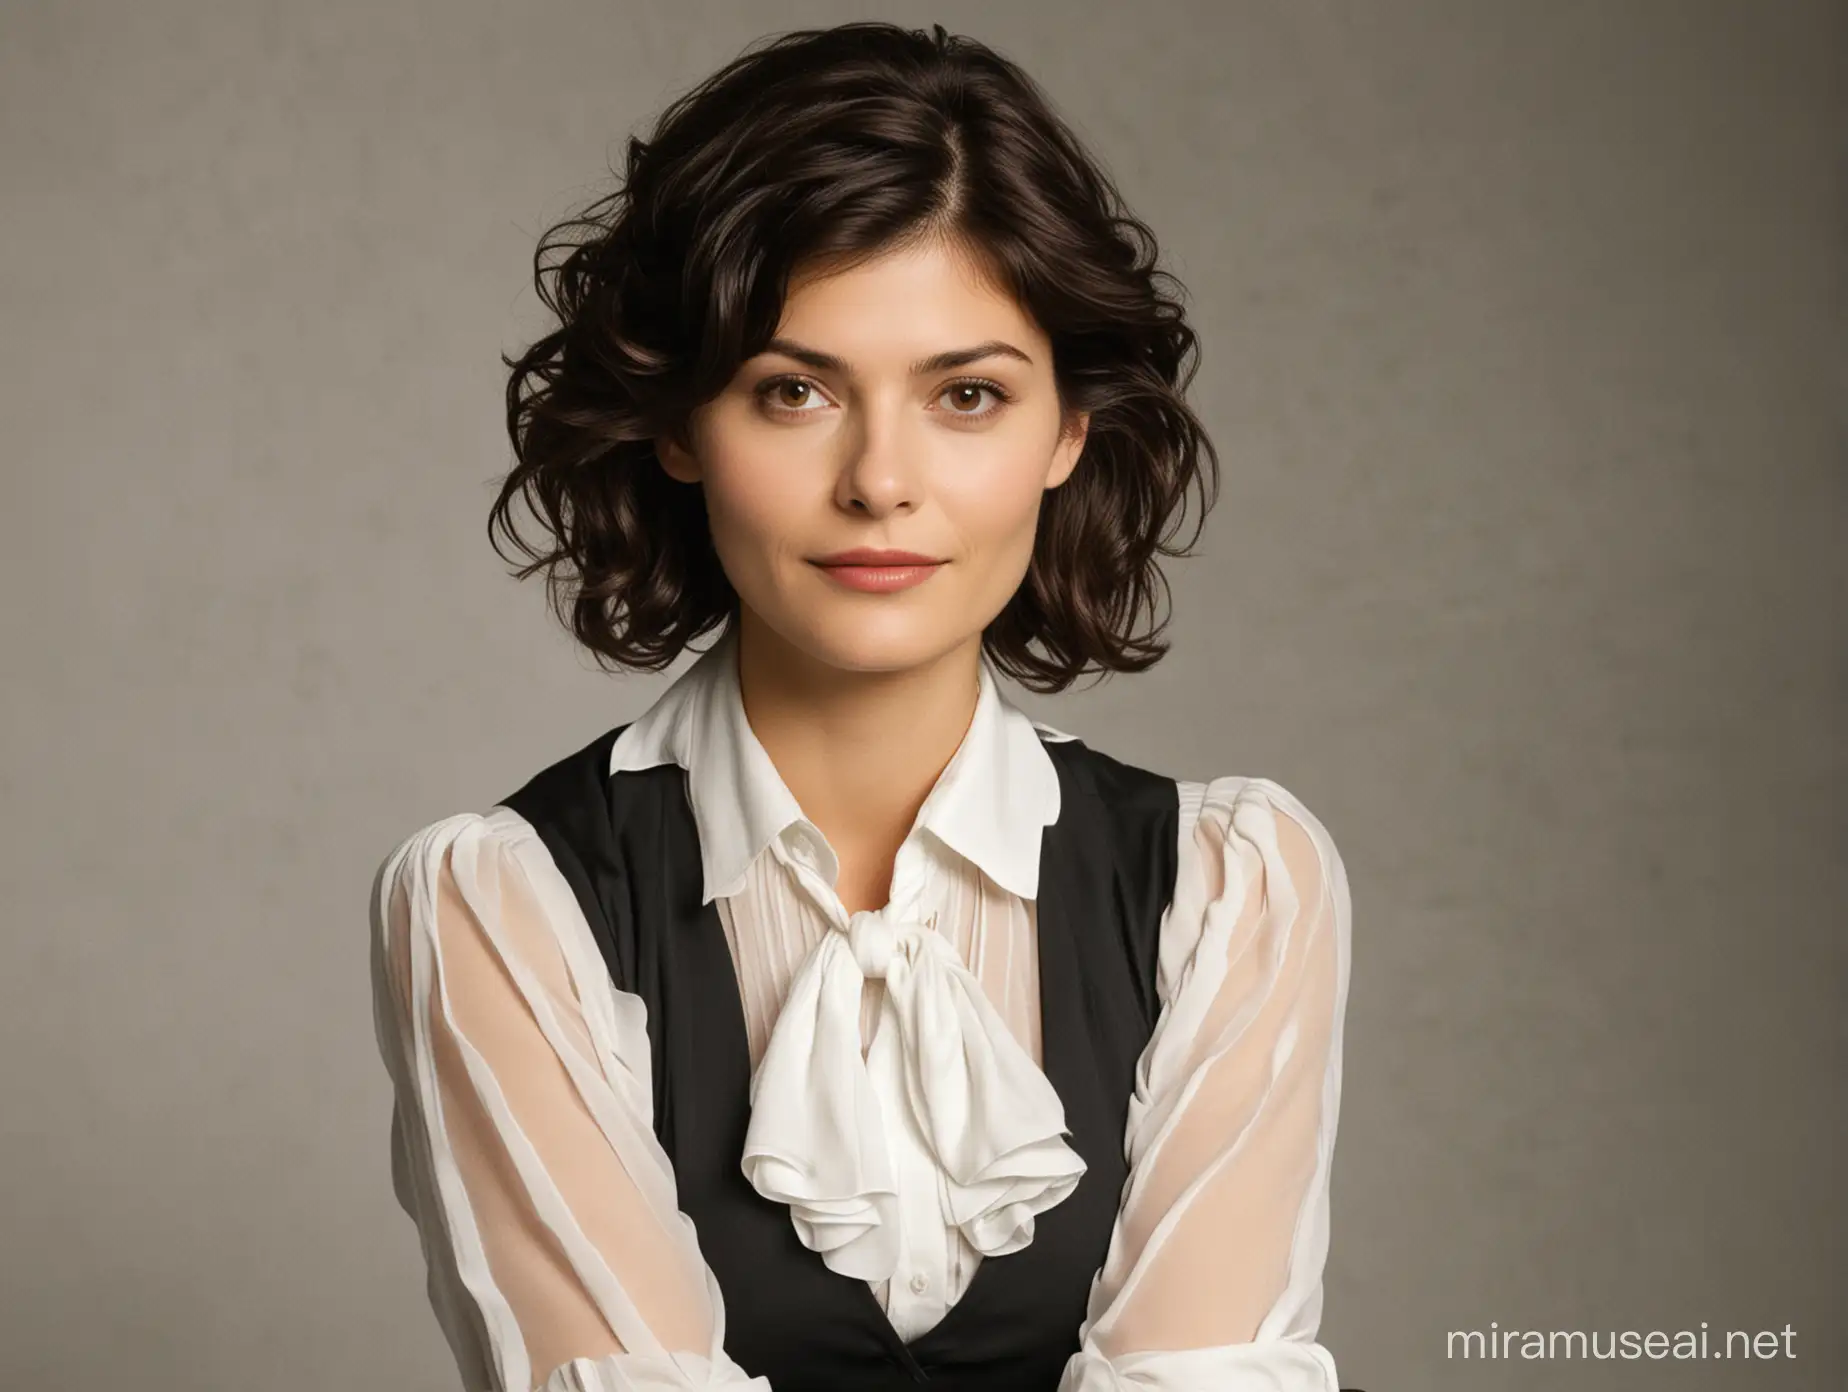 Audrey Tautou Portrays Lois Lane in a Classic Style